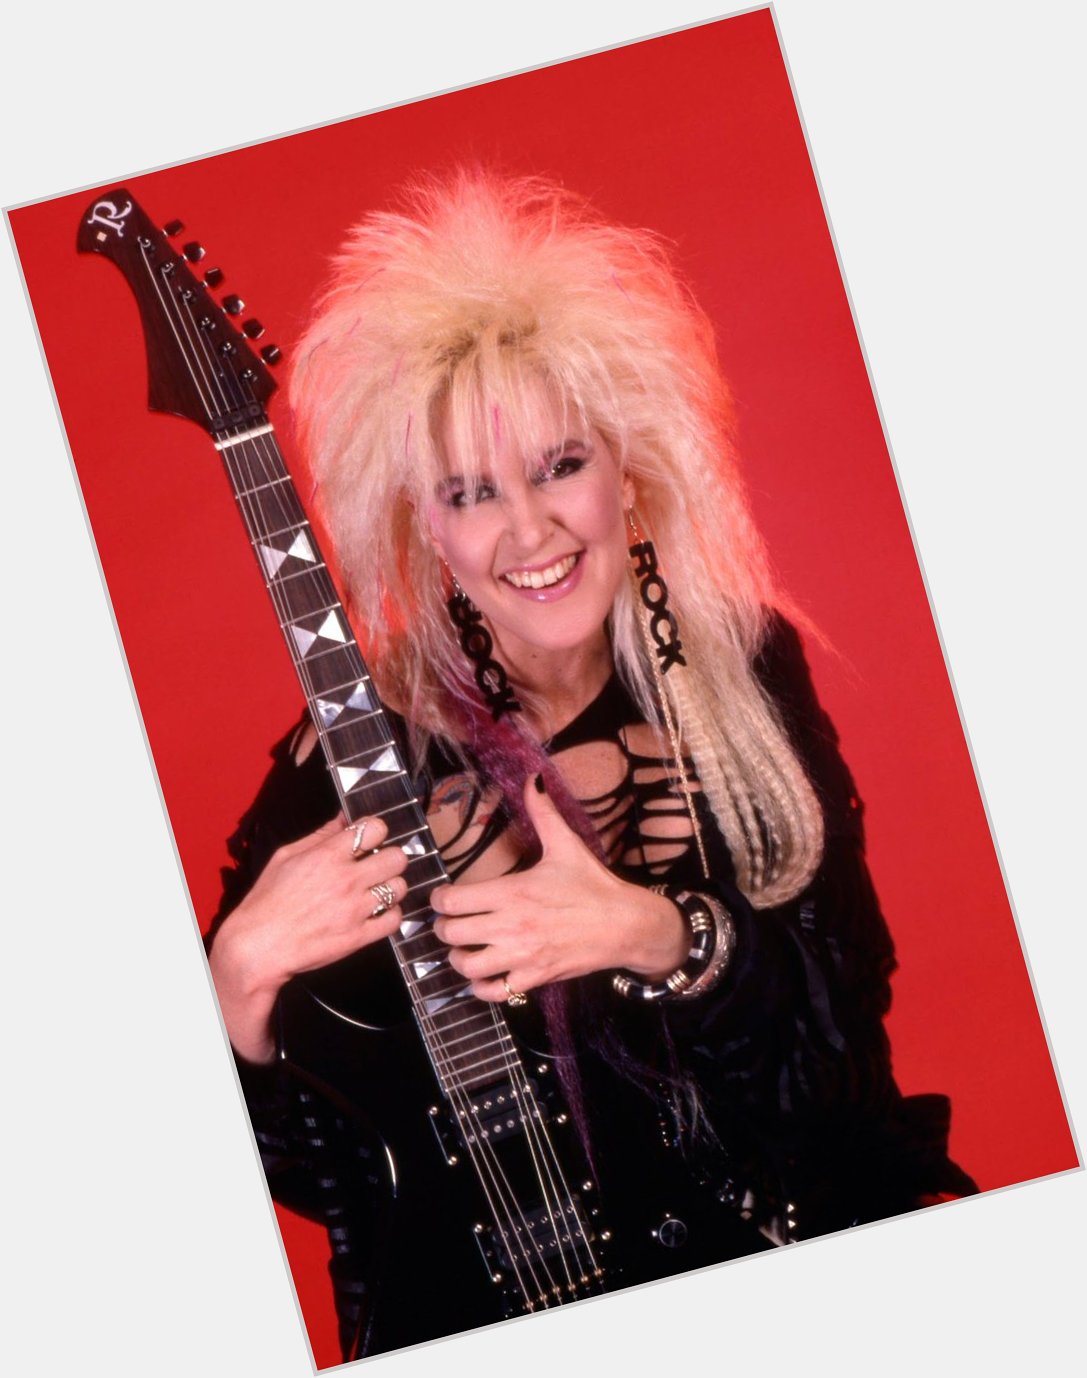 And finally Happy Birthday to the gorgeous rock queen Lita Ford! Xxx 